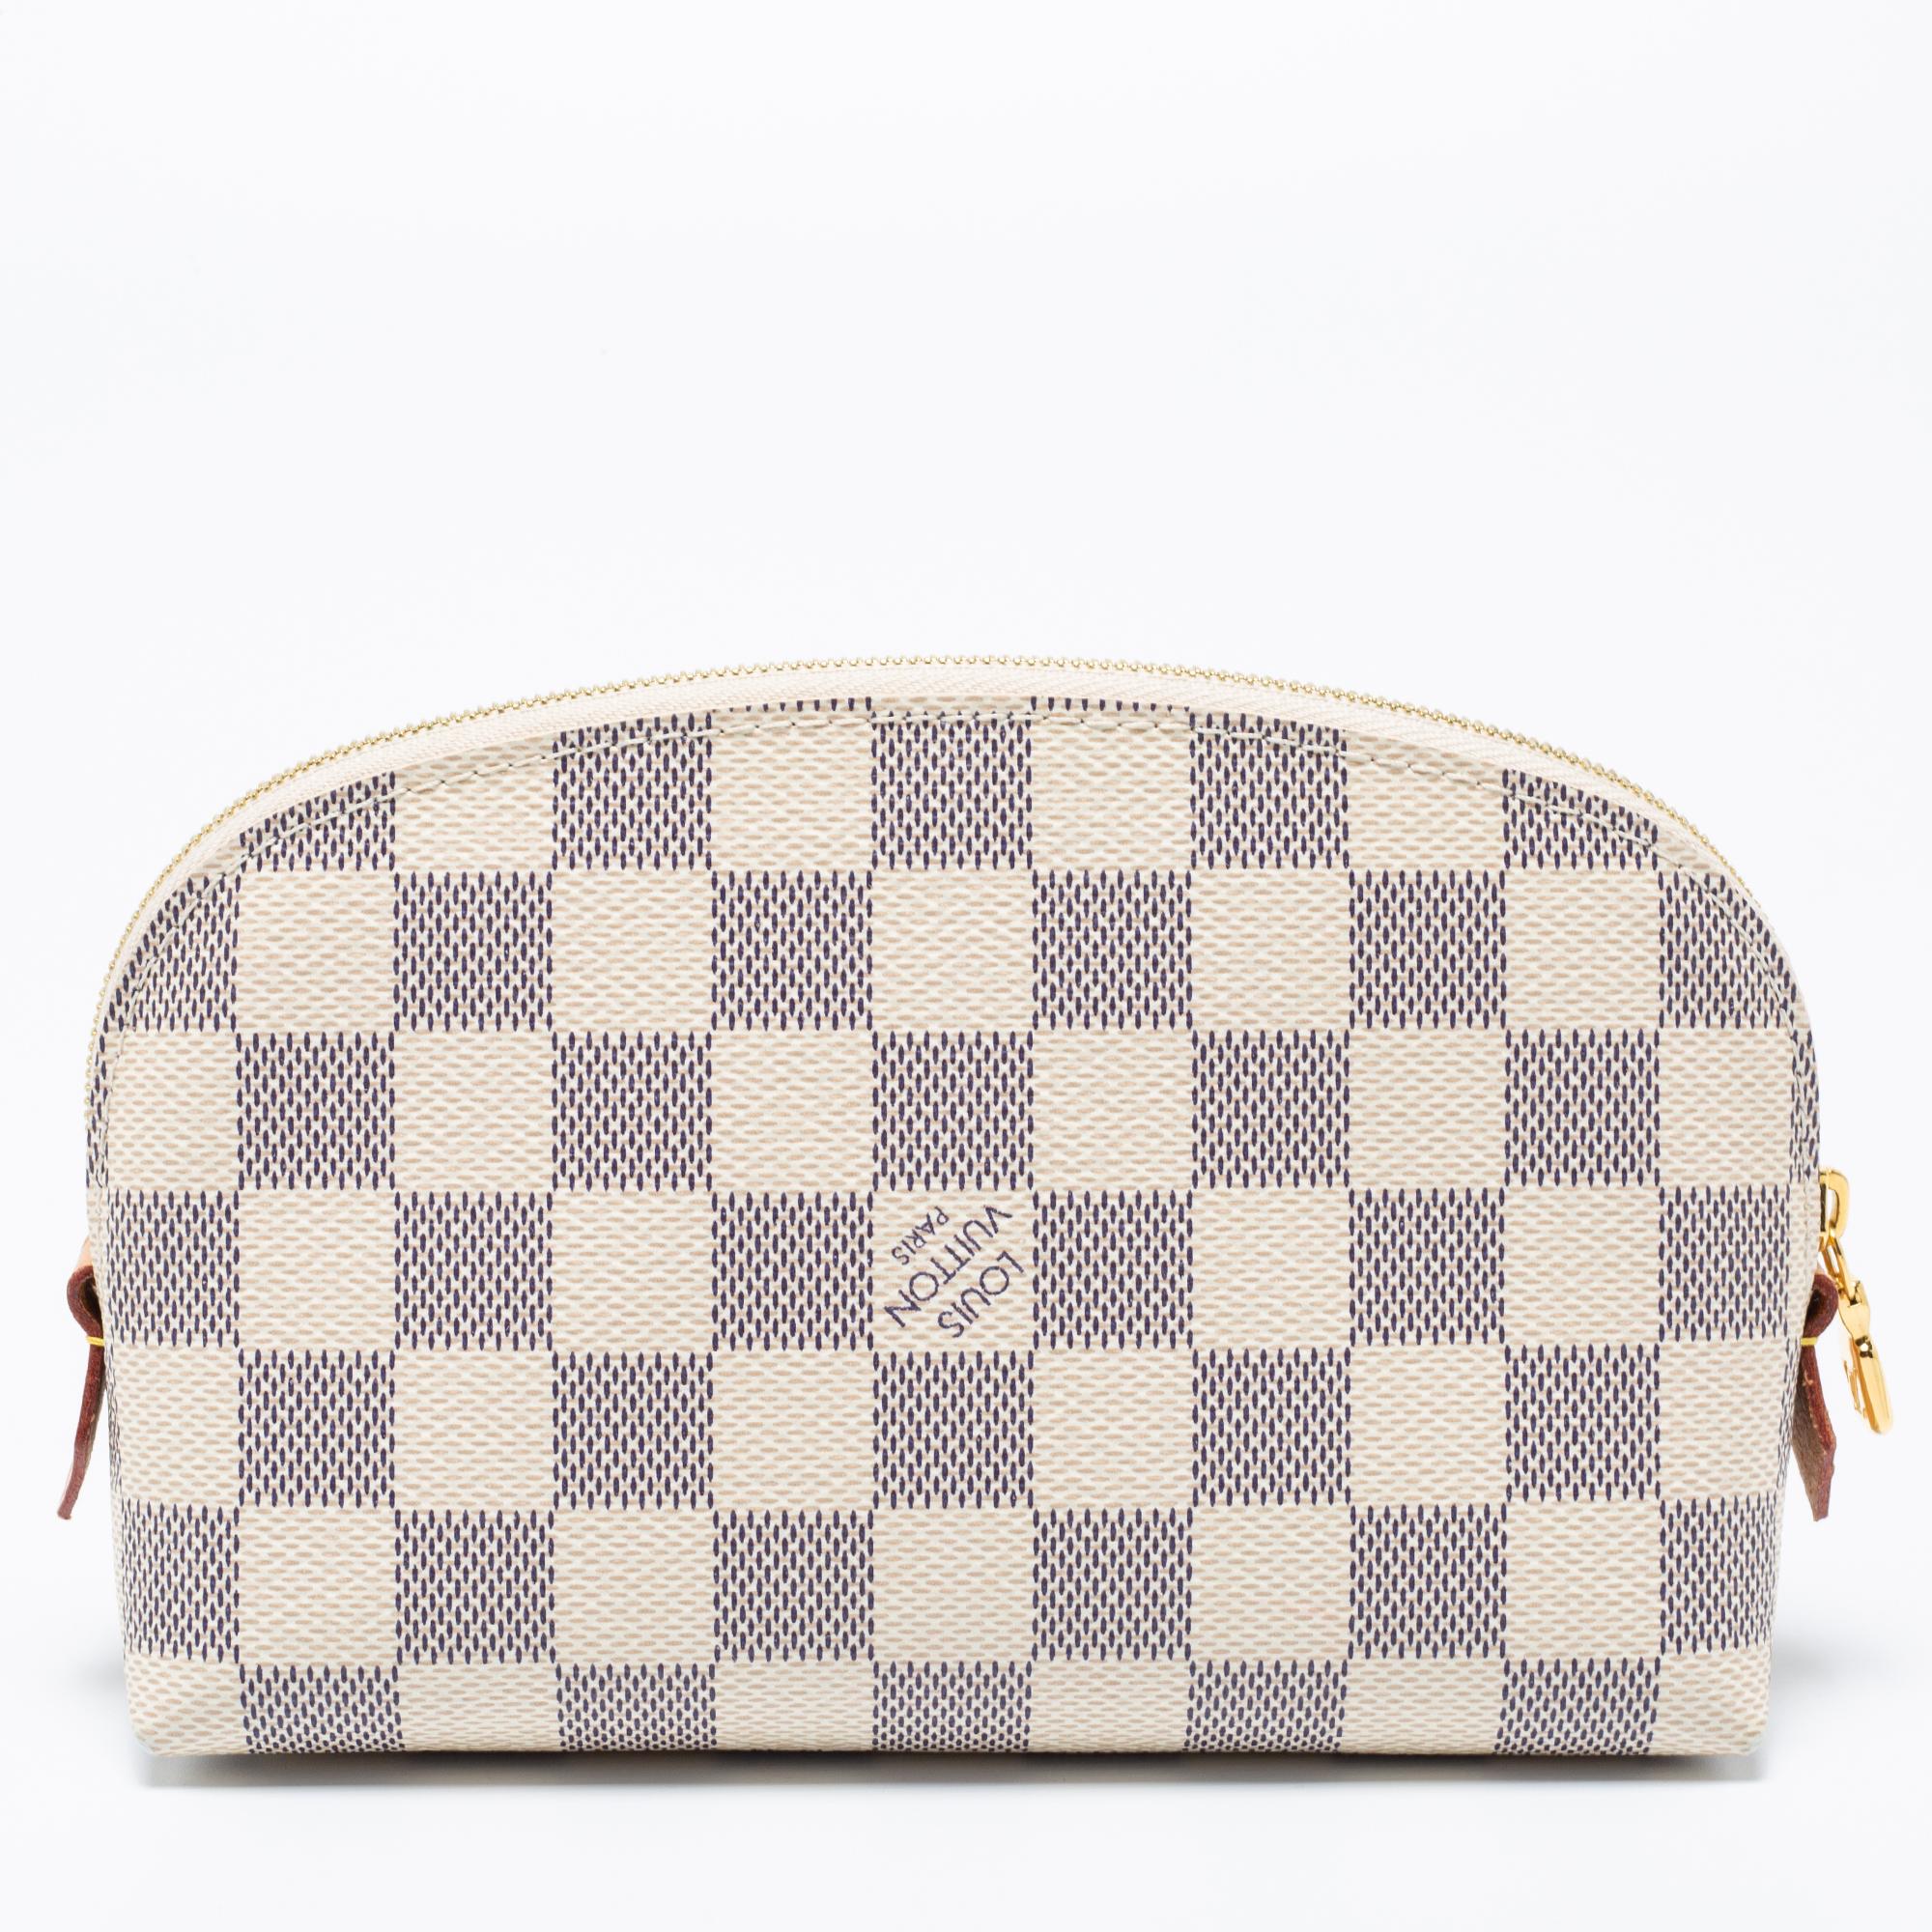 This cosmetic pouch from the house of Louis Vuitton is crafted from Damier Azur canvas and secured with a zipper in gold-tone metal. It has enough space to easily hold your cosmetics. Carry it while traveling to neatly organize your essentials.

